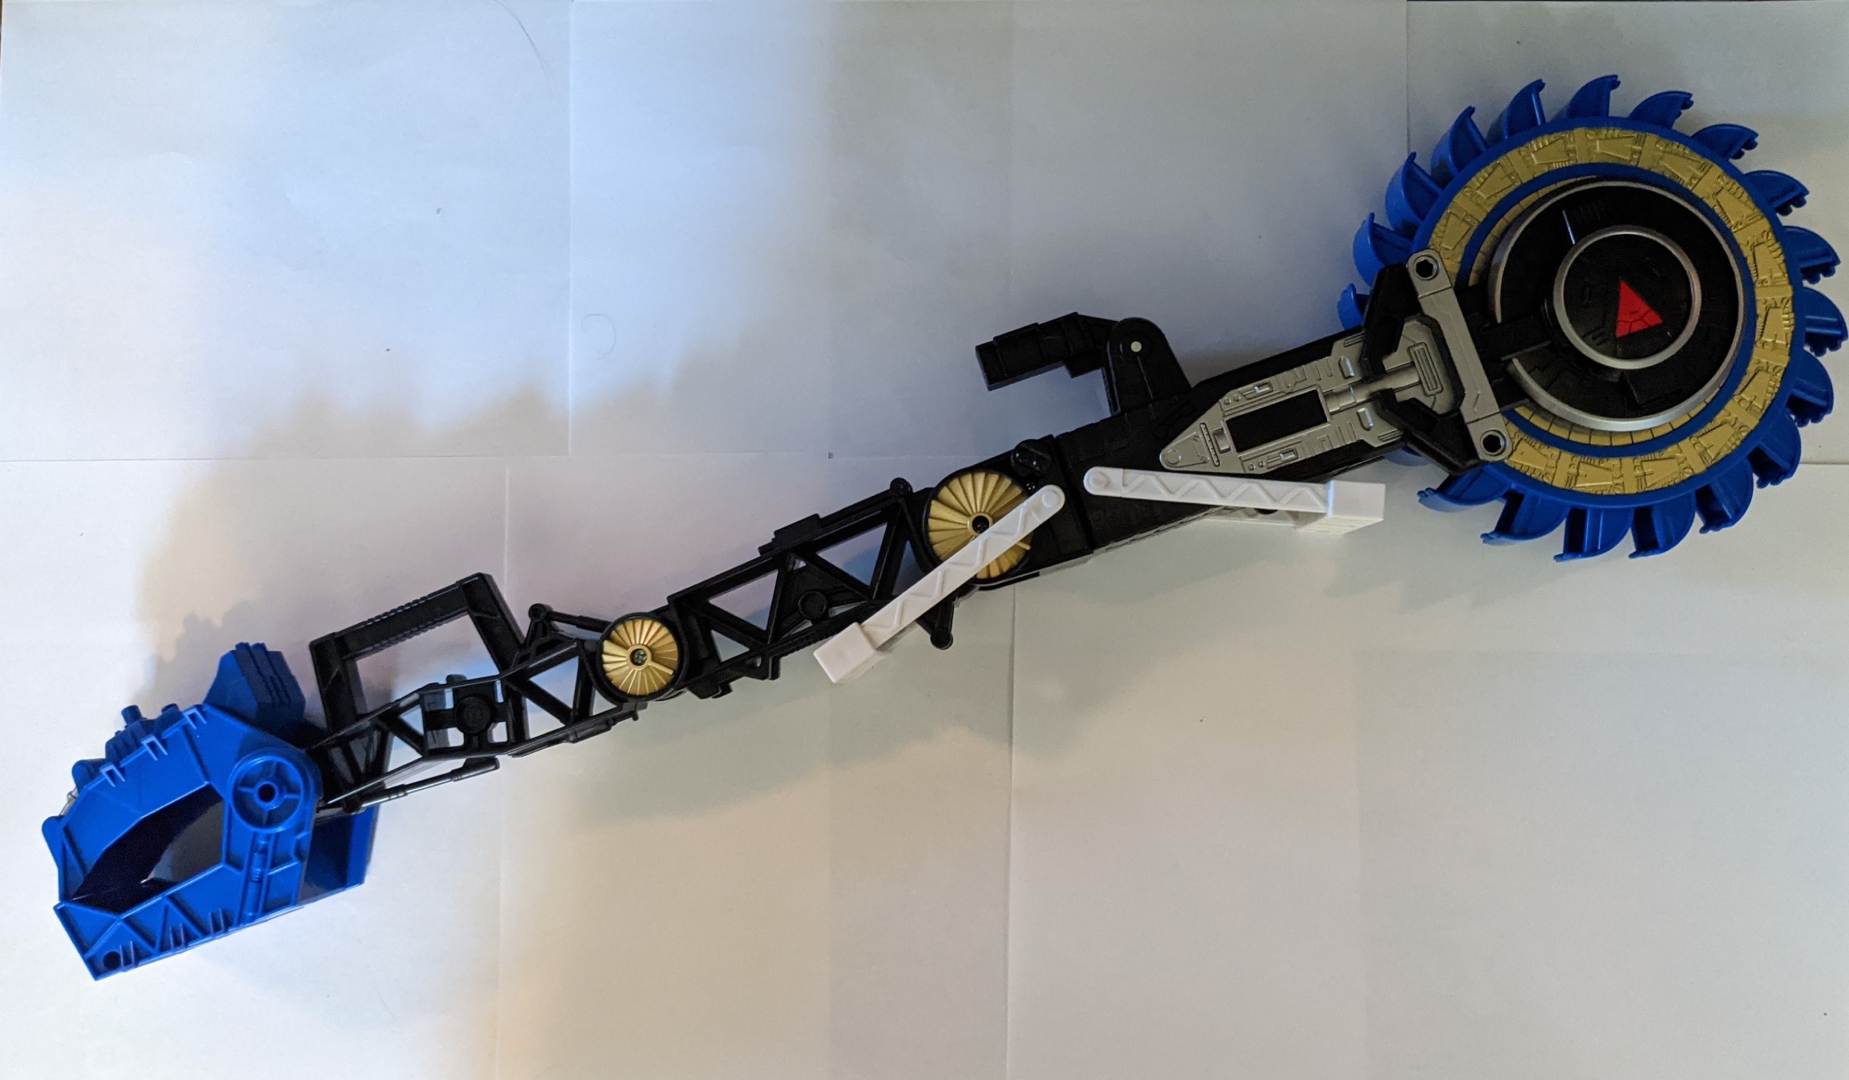 A picture of Metroplex's Sparkdrinker axe.